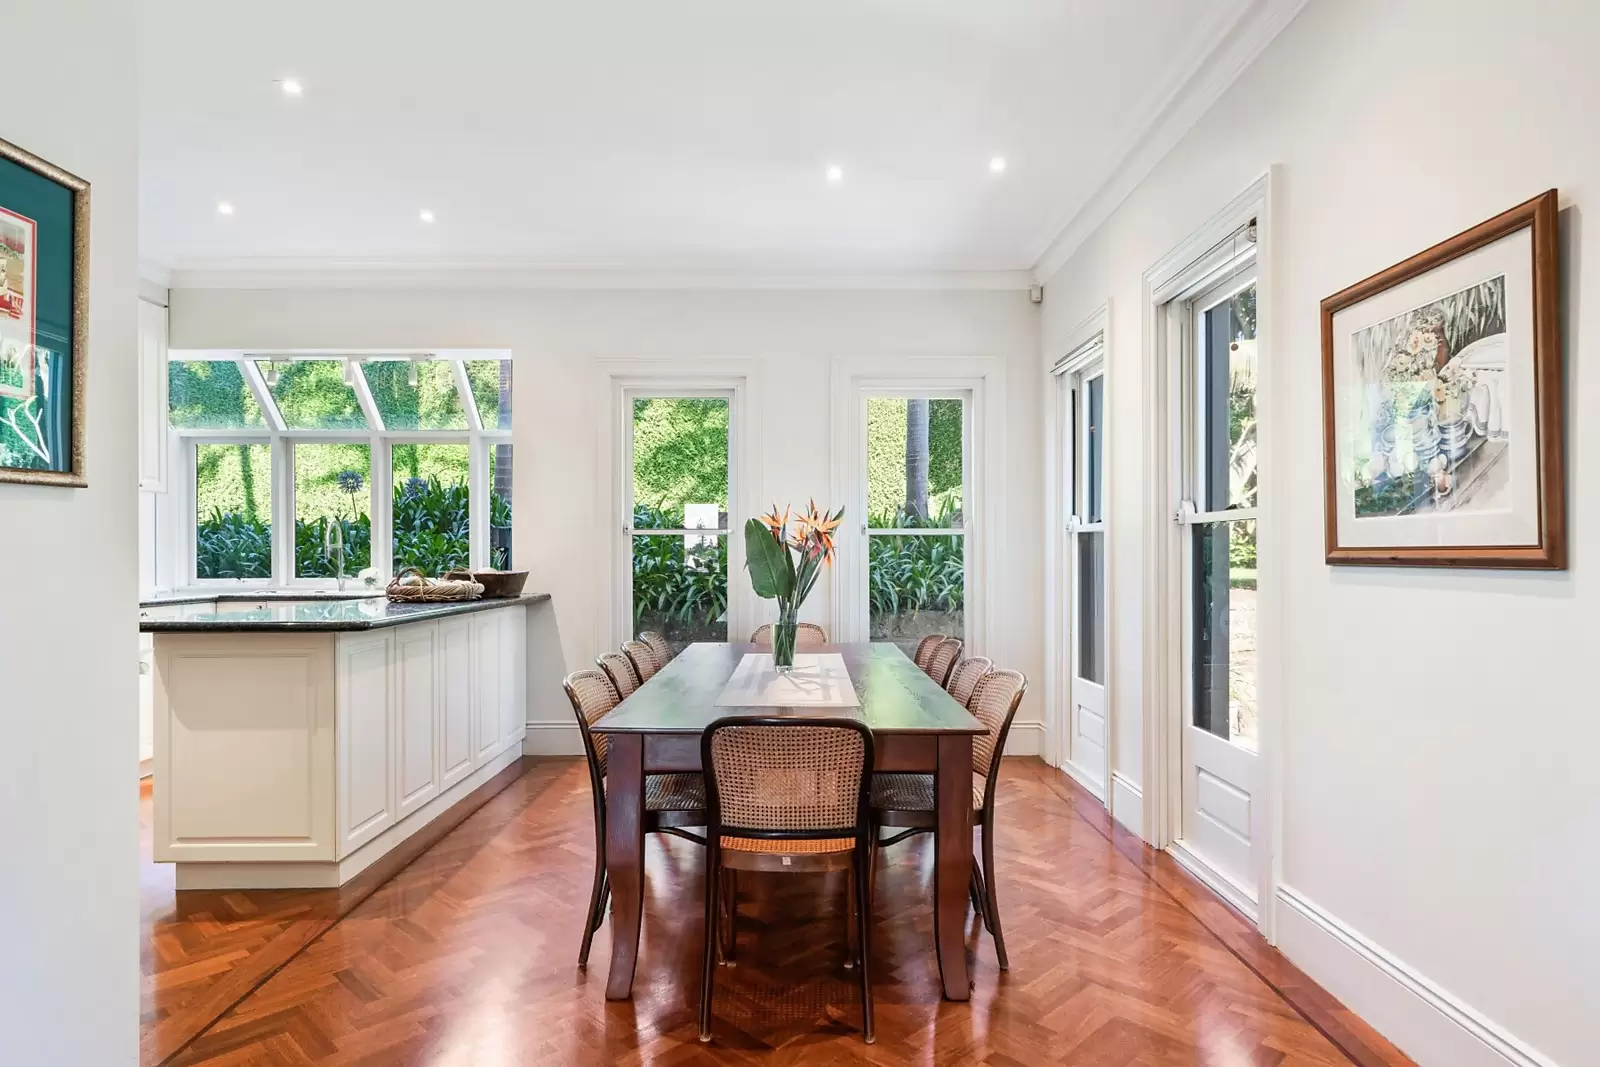 Photo #18: 33 Olphert Avenue, Vaucluse - Sold by Sydney Sotheby's International Realty